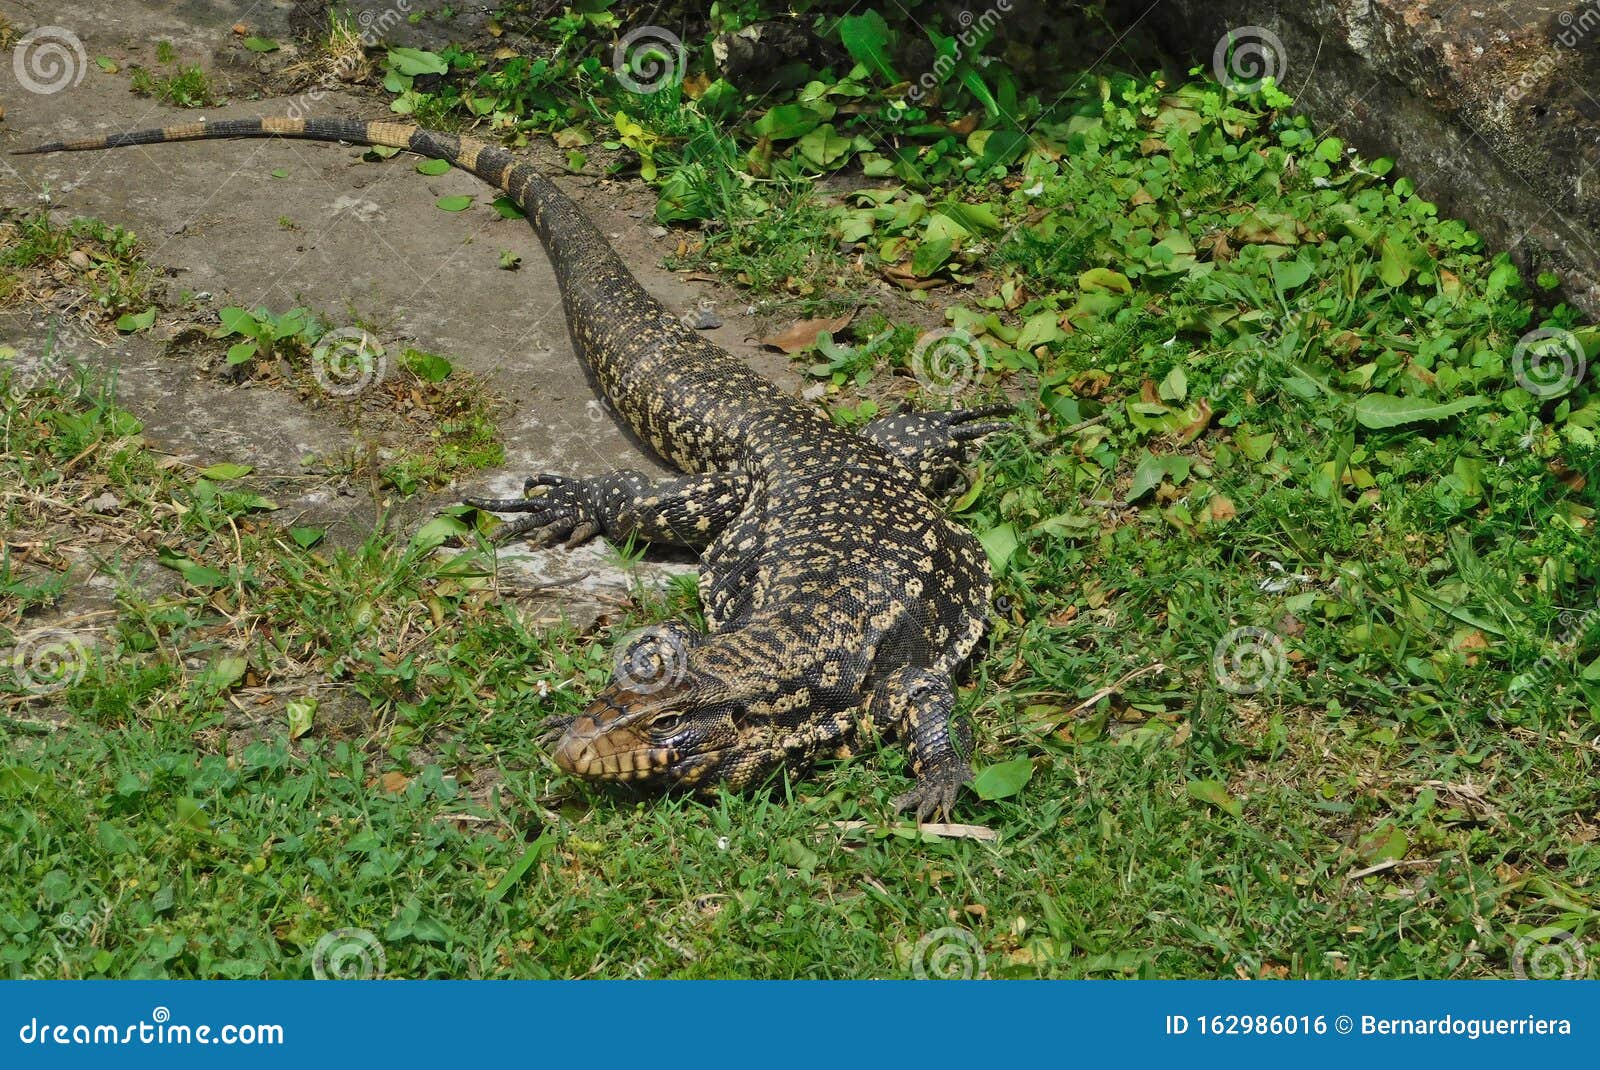 lizard overo in the rural area that invades the family home